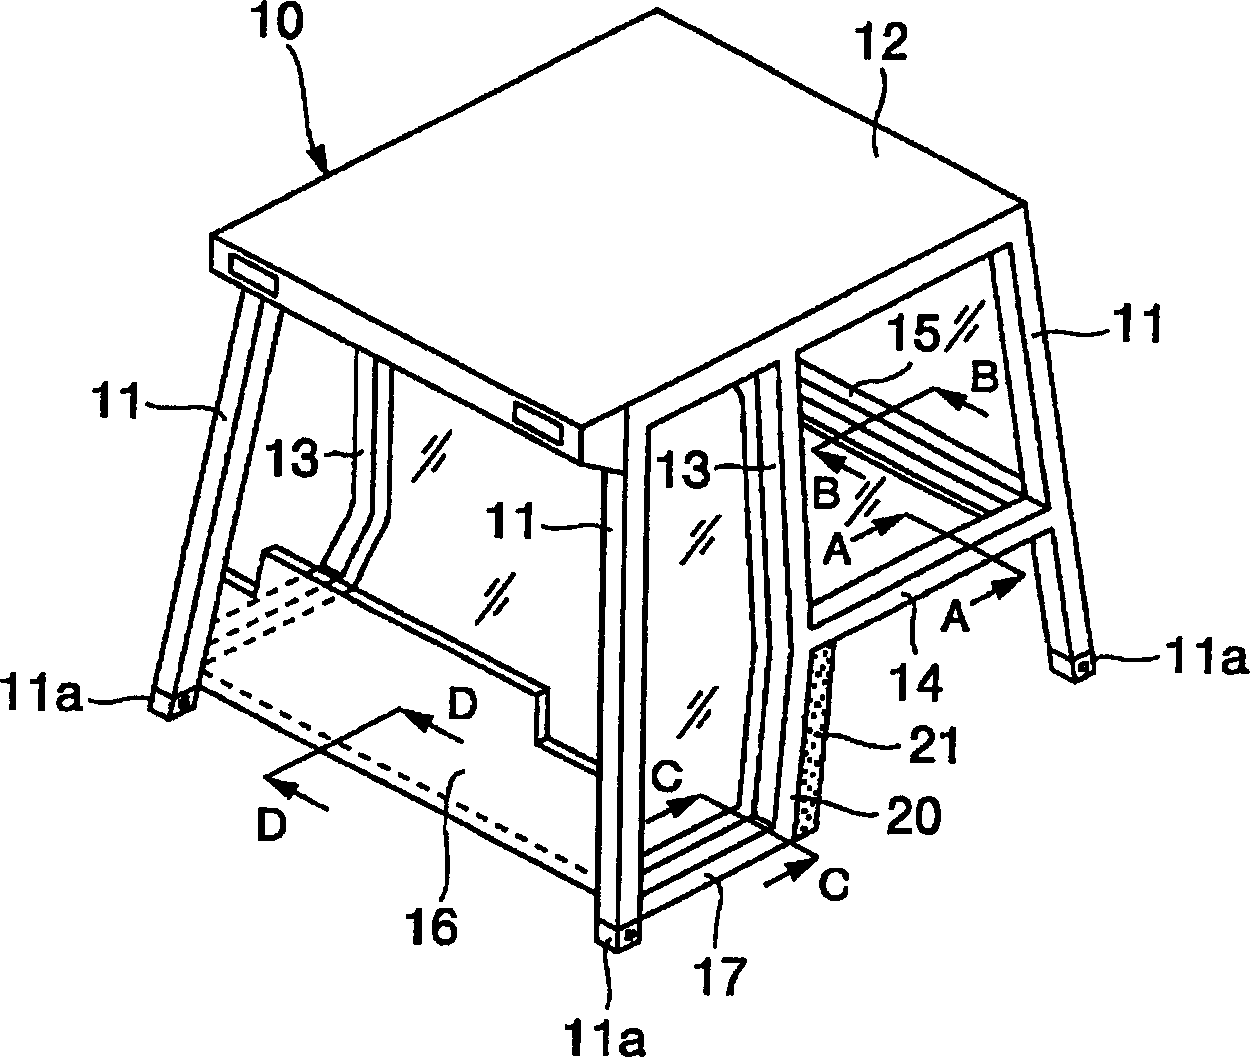 Baseplate frame of bulldozer and ROPS operator cabin for bulldozer with said baseplate frame